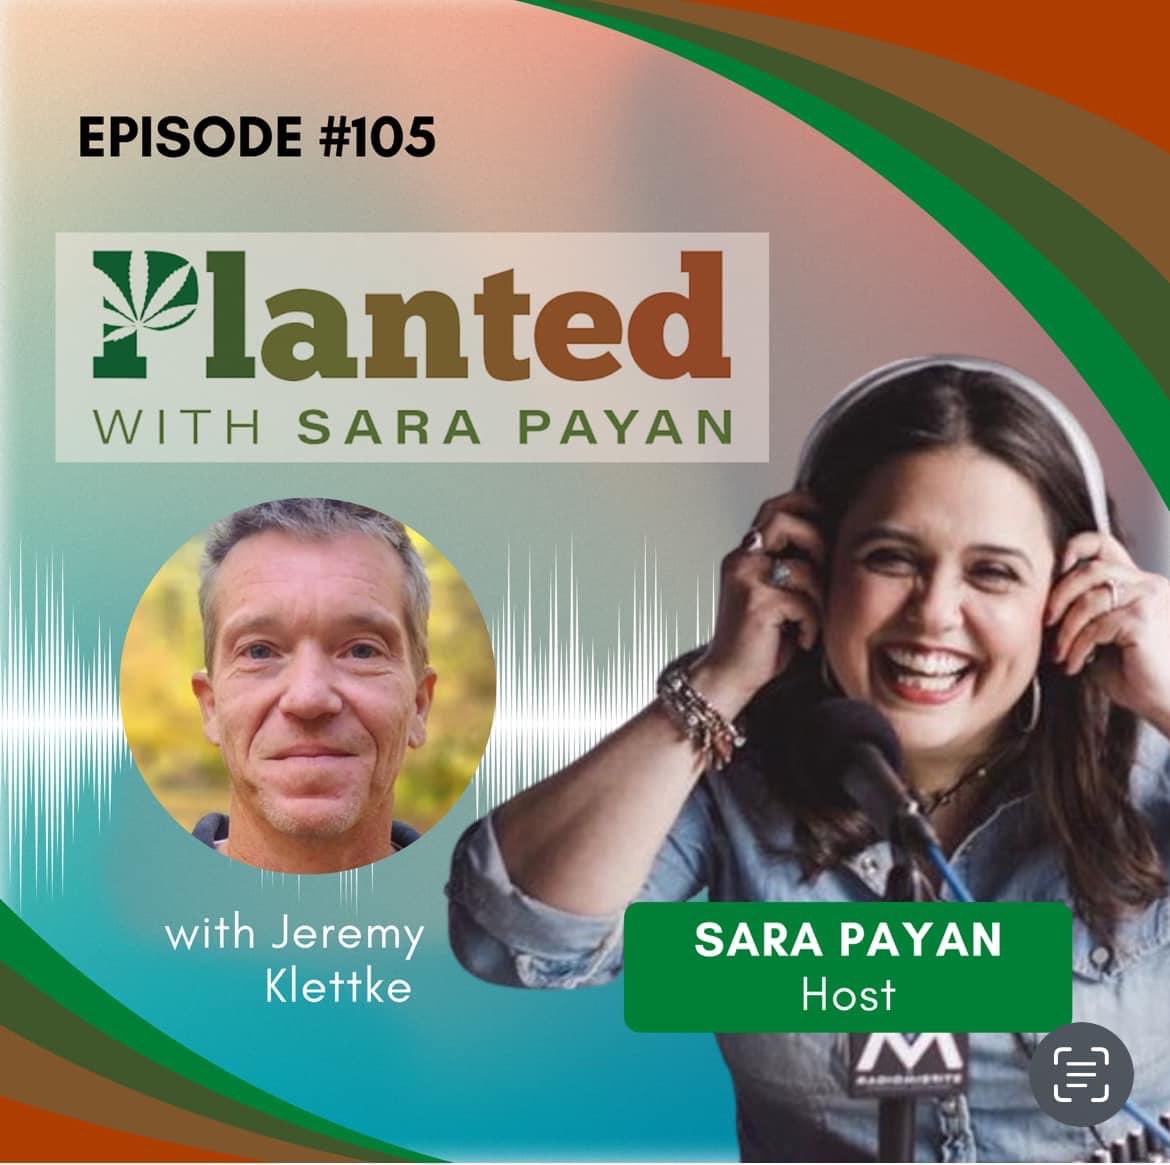 Happy day friends- time for a new episode of @plantedwithsara!

This week, @SaraMPayan talks about legacy genetics and cannabis science with Jeremy Klettke, Founder and CEO of Davis Hemp Farms.

🔗  radiomisfits.com/psp105/

@ApplePodcasts @spotifypodcasts @radiosmisfits